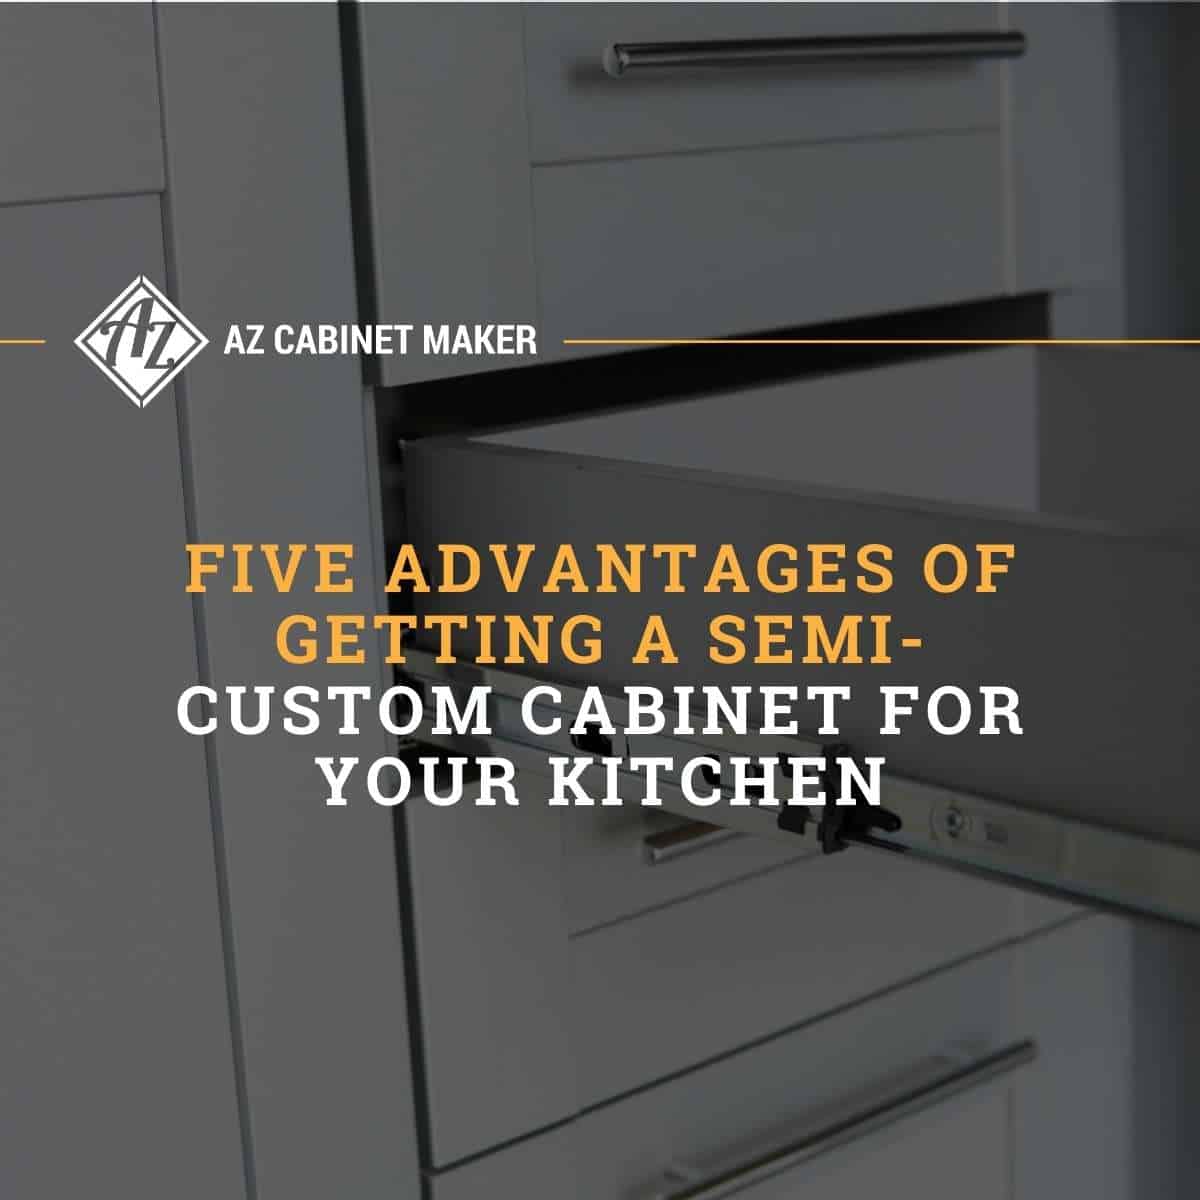 Five Advantages Of Getting a Semi-Custom Cabinet For Your Kitchen